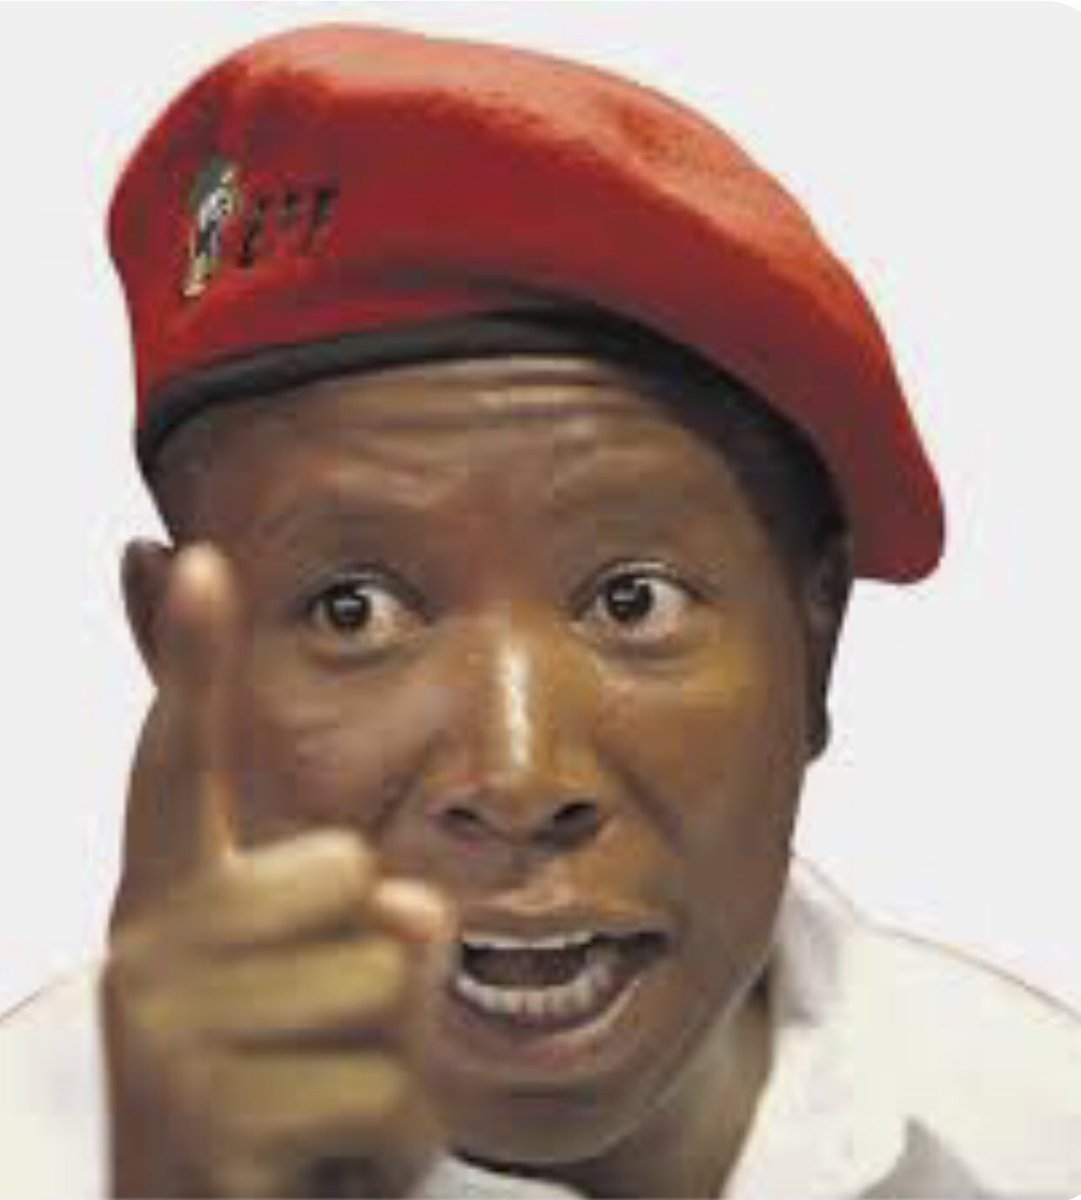 Words that describe Julius Malema: Liar Crazy Fraud Sexist Racist Egotist Corrupt Buffoon Coward Cheater Ignorant Hypocrit Arrogant Dishonest Narcissist Disgusting Unqualified Incompetent A person like this should never be allowed to ascend to the highest office, register to…